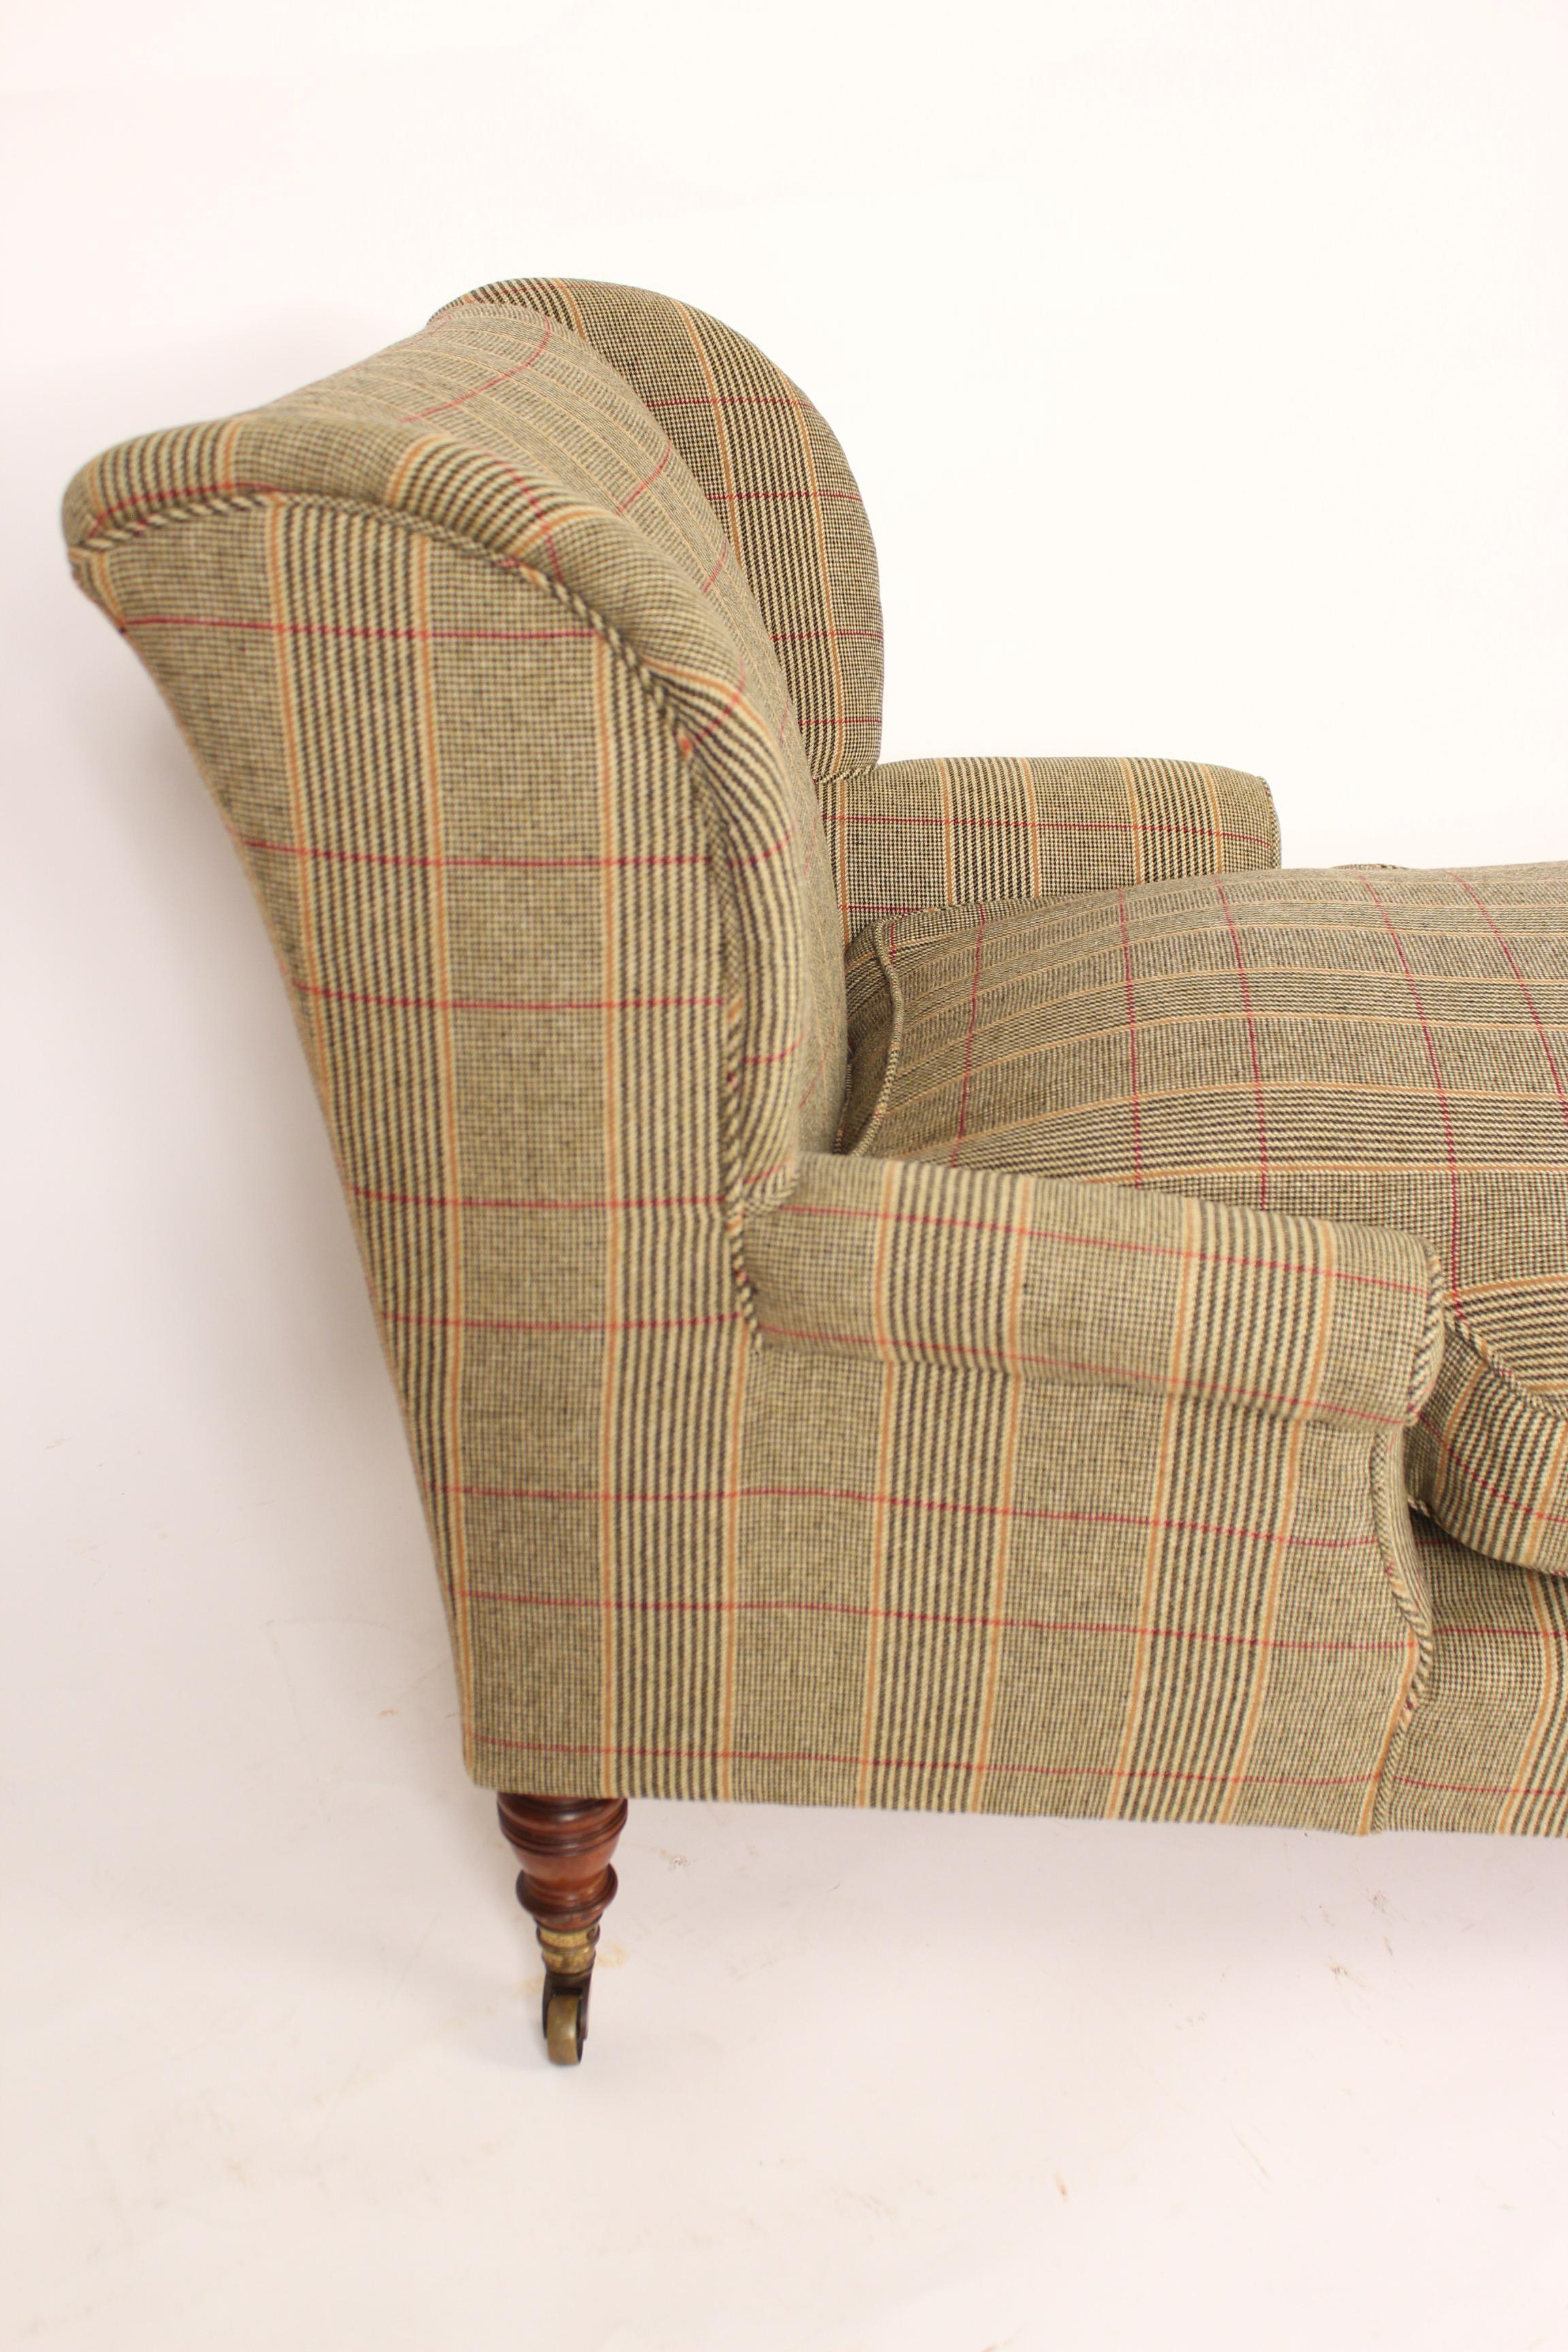 Upholstery Antique William iv Style Chaise Lounge by Howard & Sons